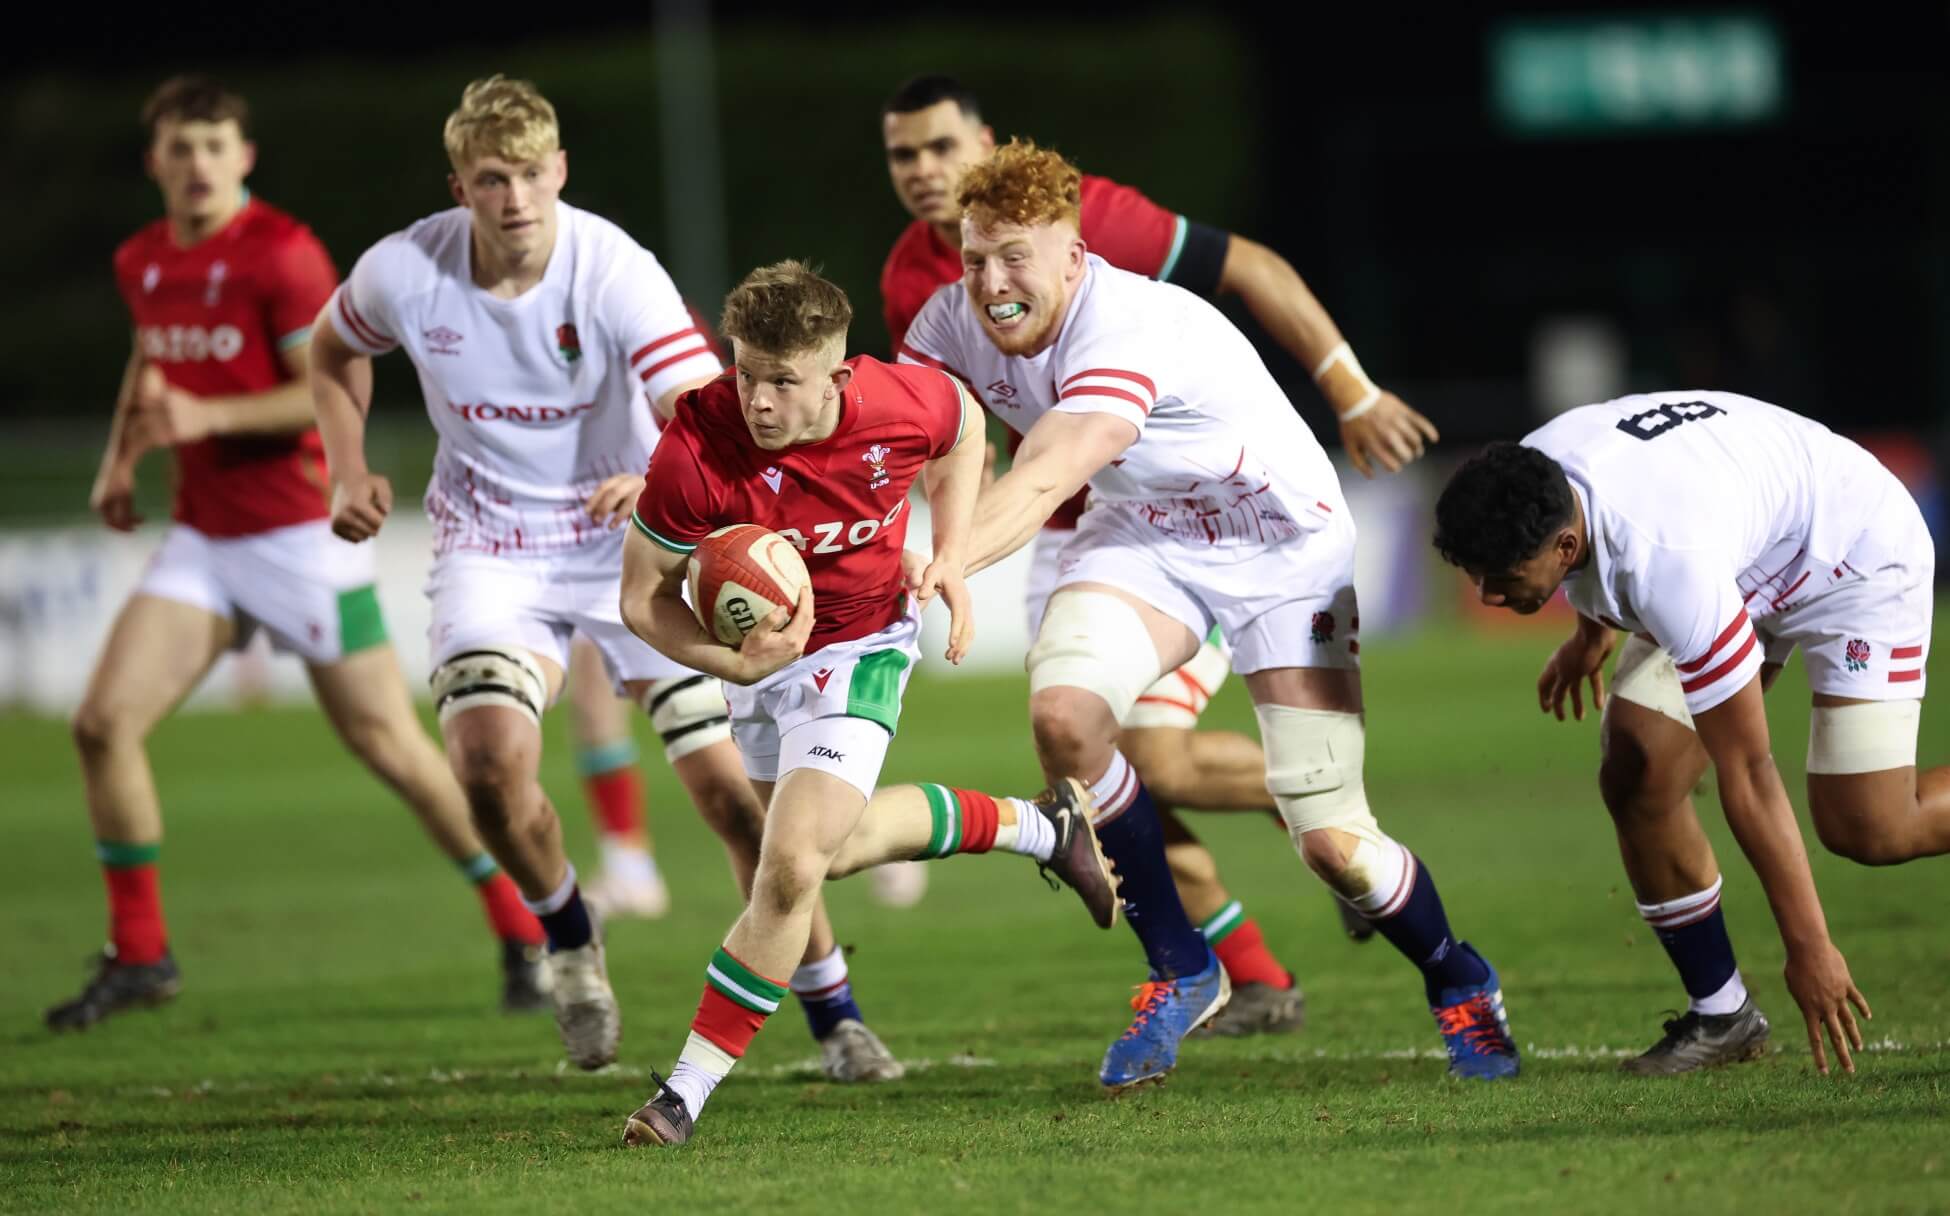 Archie Hughes named in Wales side for U20s opener